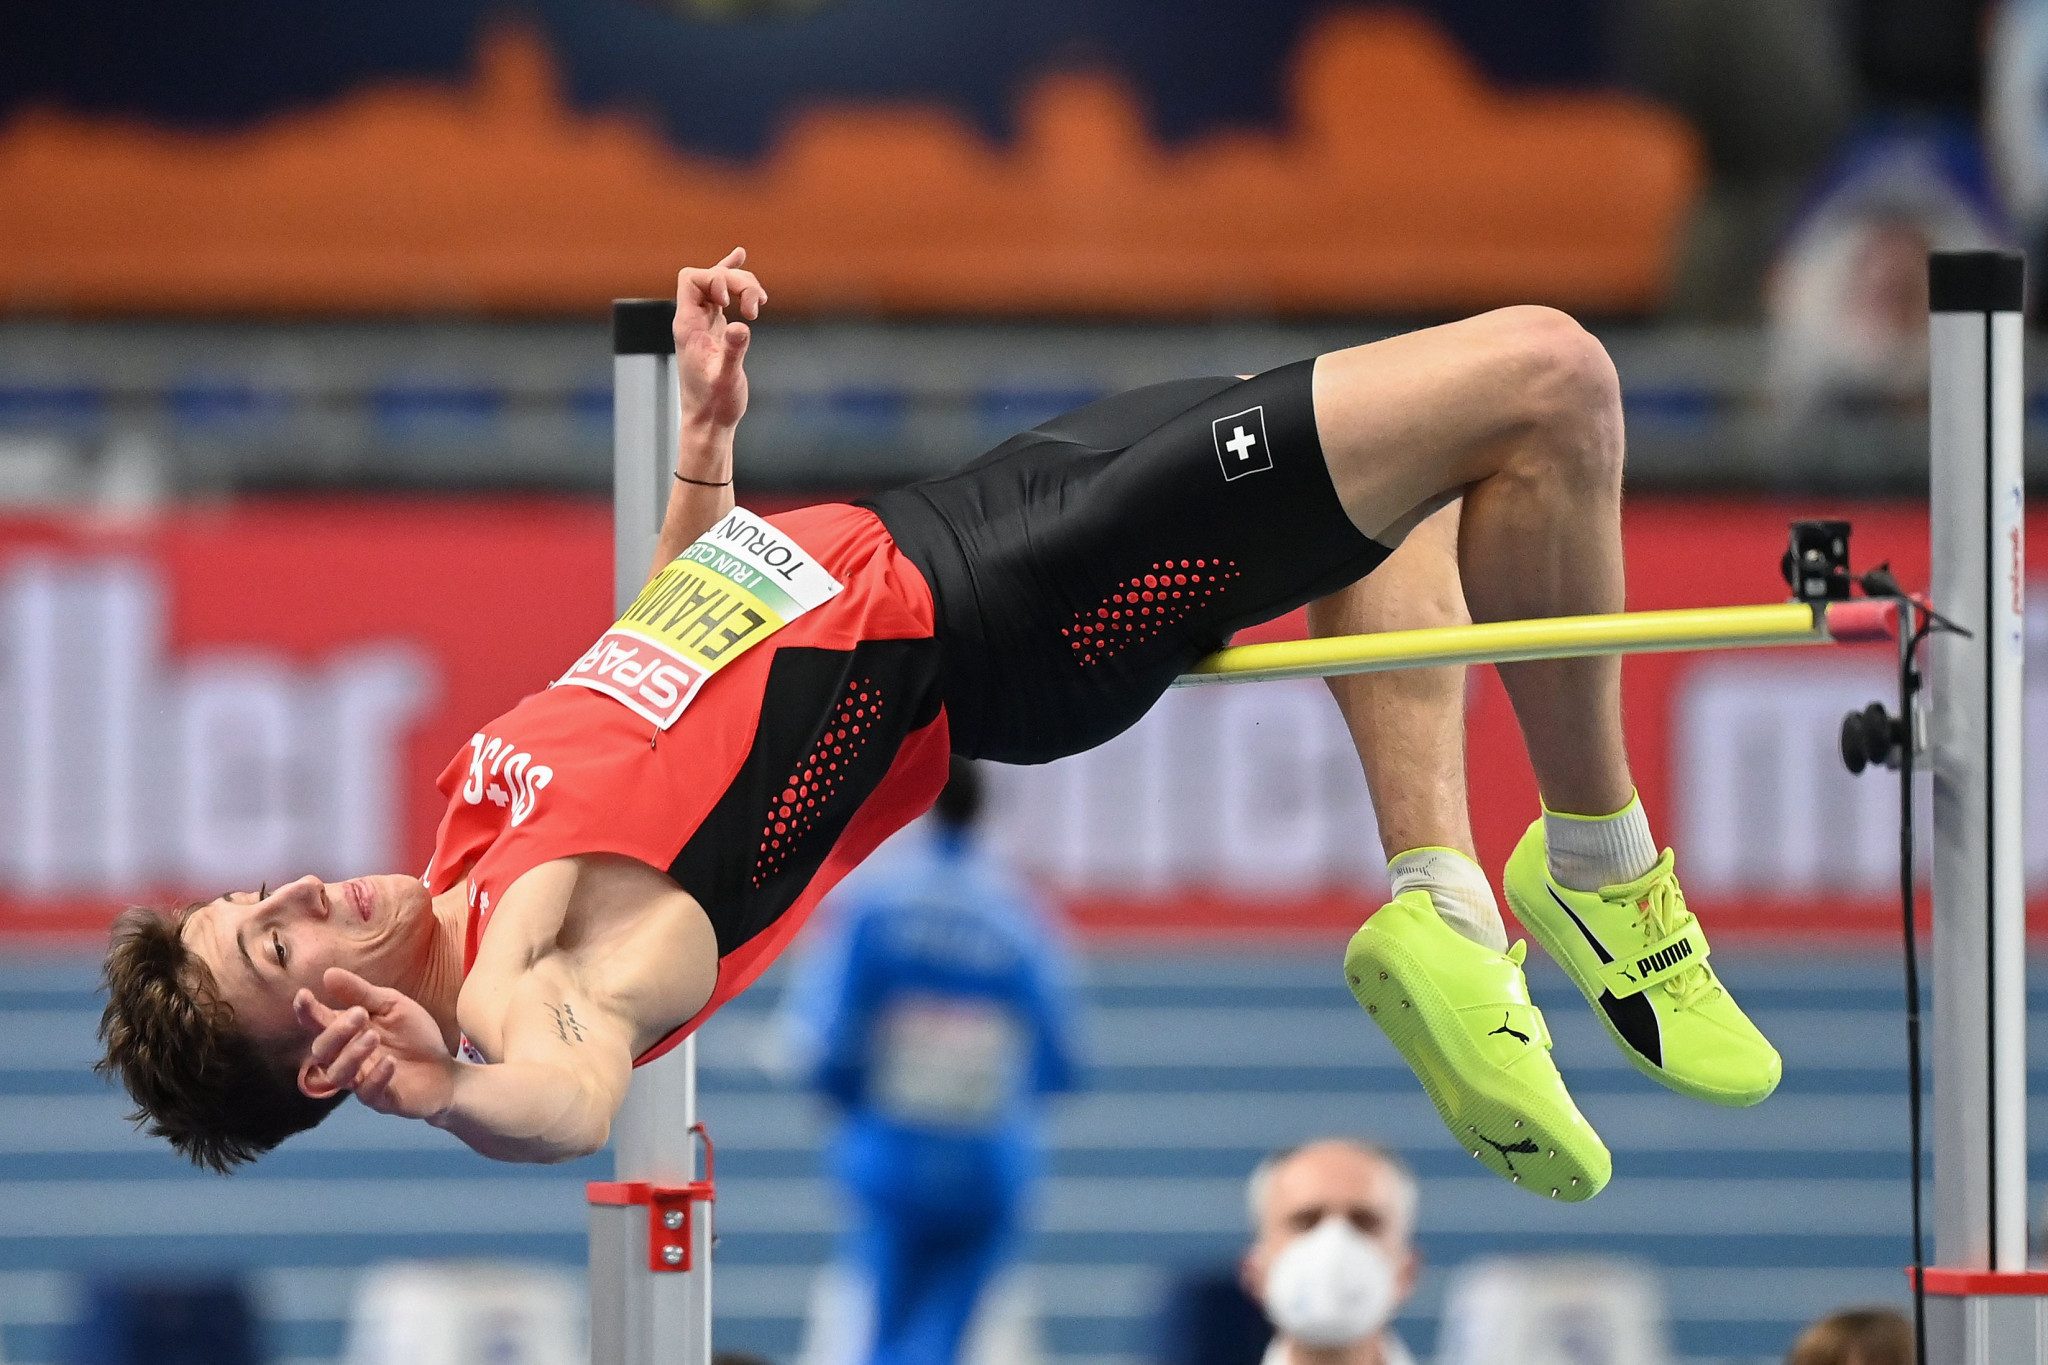 Switzerland's Simon Ehammer leads at the halfway stage of the decathlon at the Gold event on the World Athletics Combined Events Tour ©Getty Images